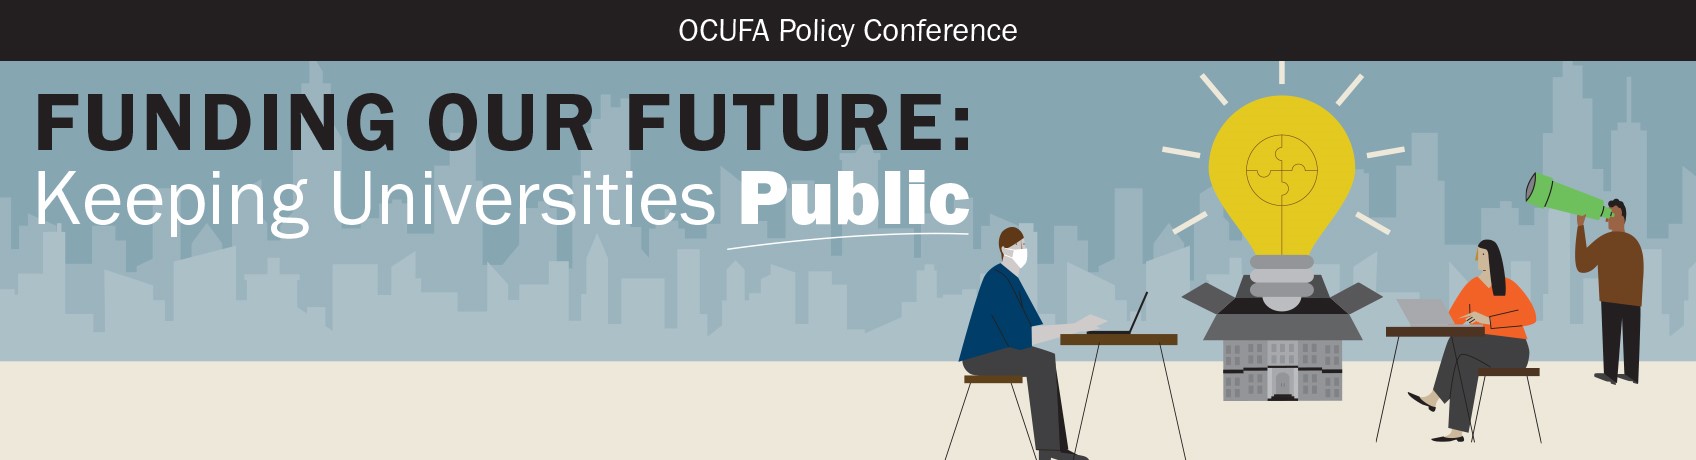 Funding Our Future: Keeping Universities Public